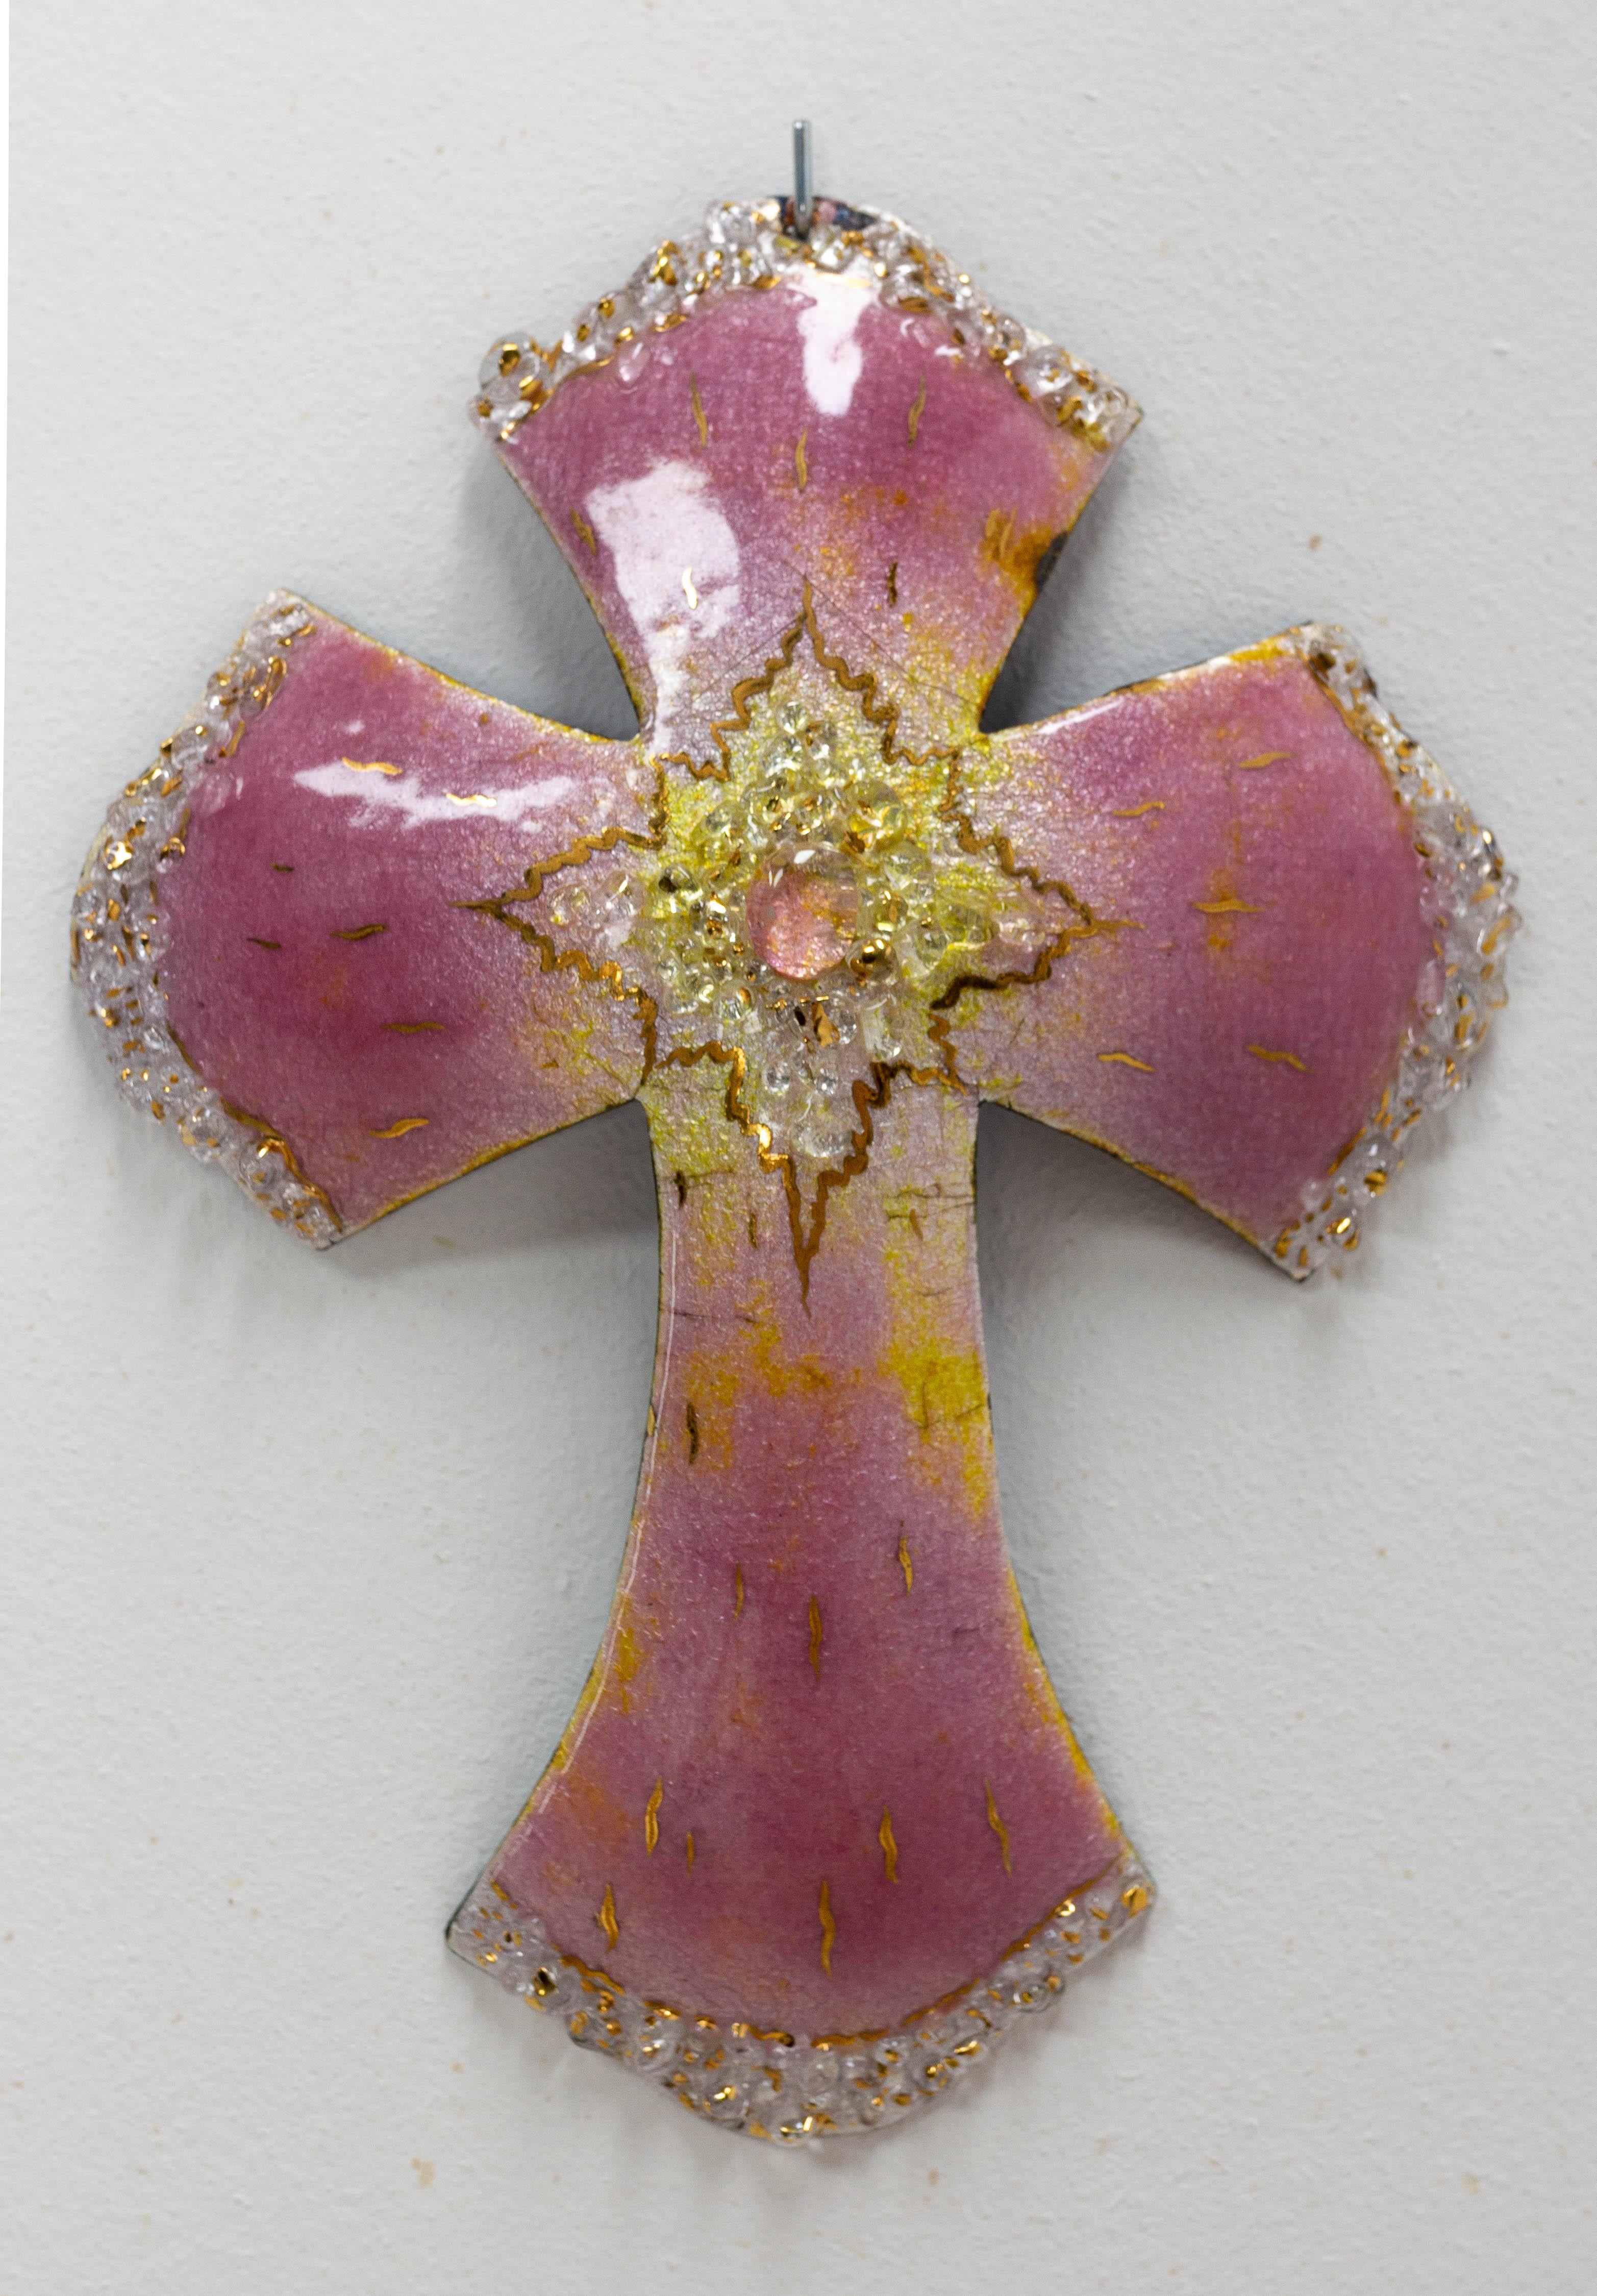 French mid-century jesus cross, made by Jean-Paul Boucharel in Limoges.
J.-P. Boucharel is a craftsman recognized in the world of traditional French art.
Enameled pink copper.
Good vintage condition.

